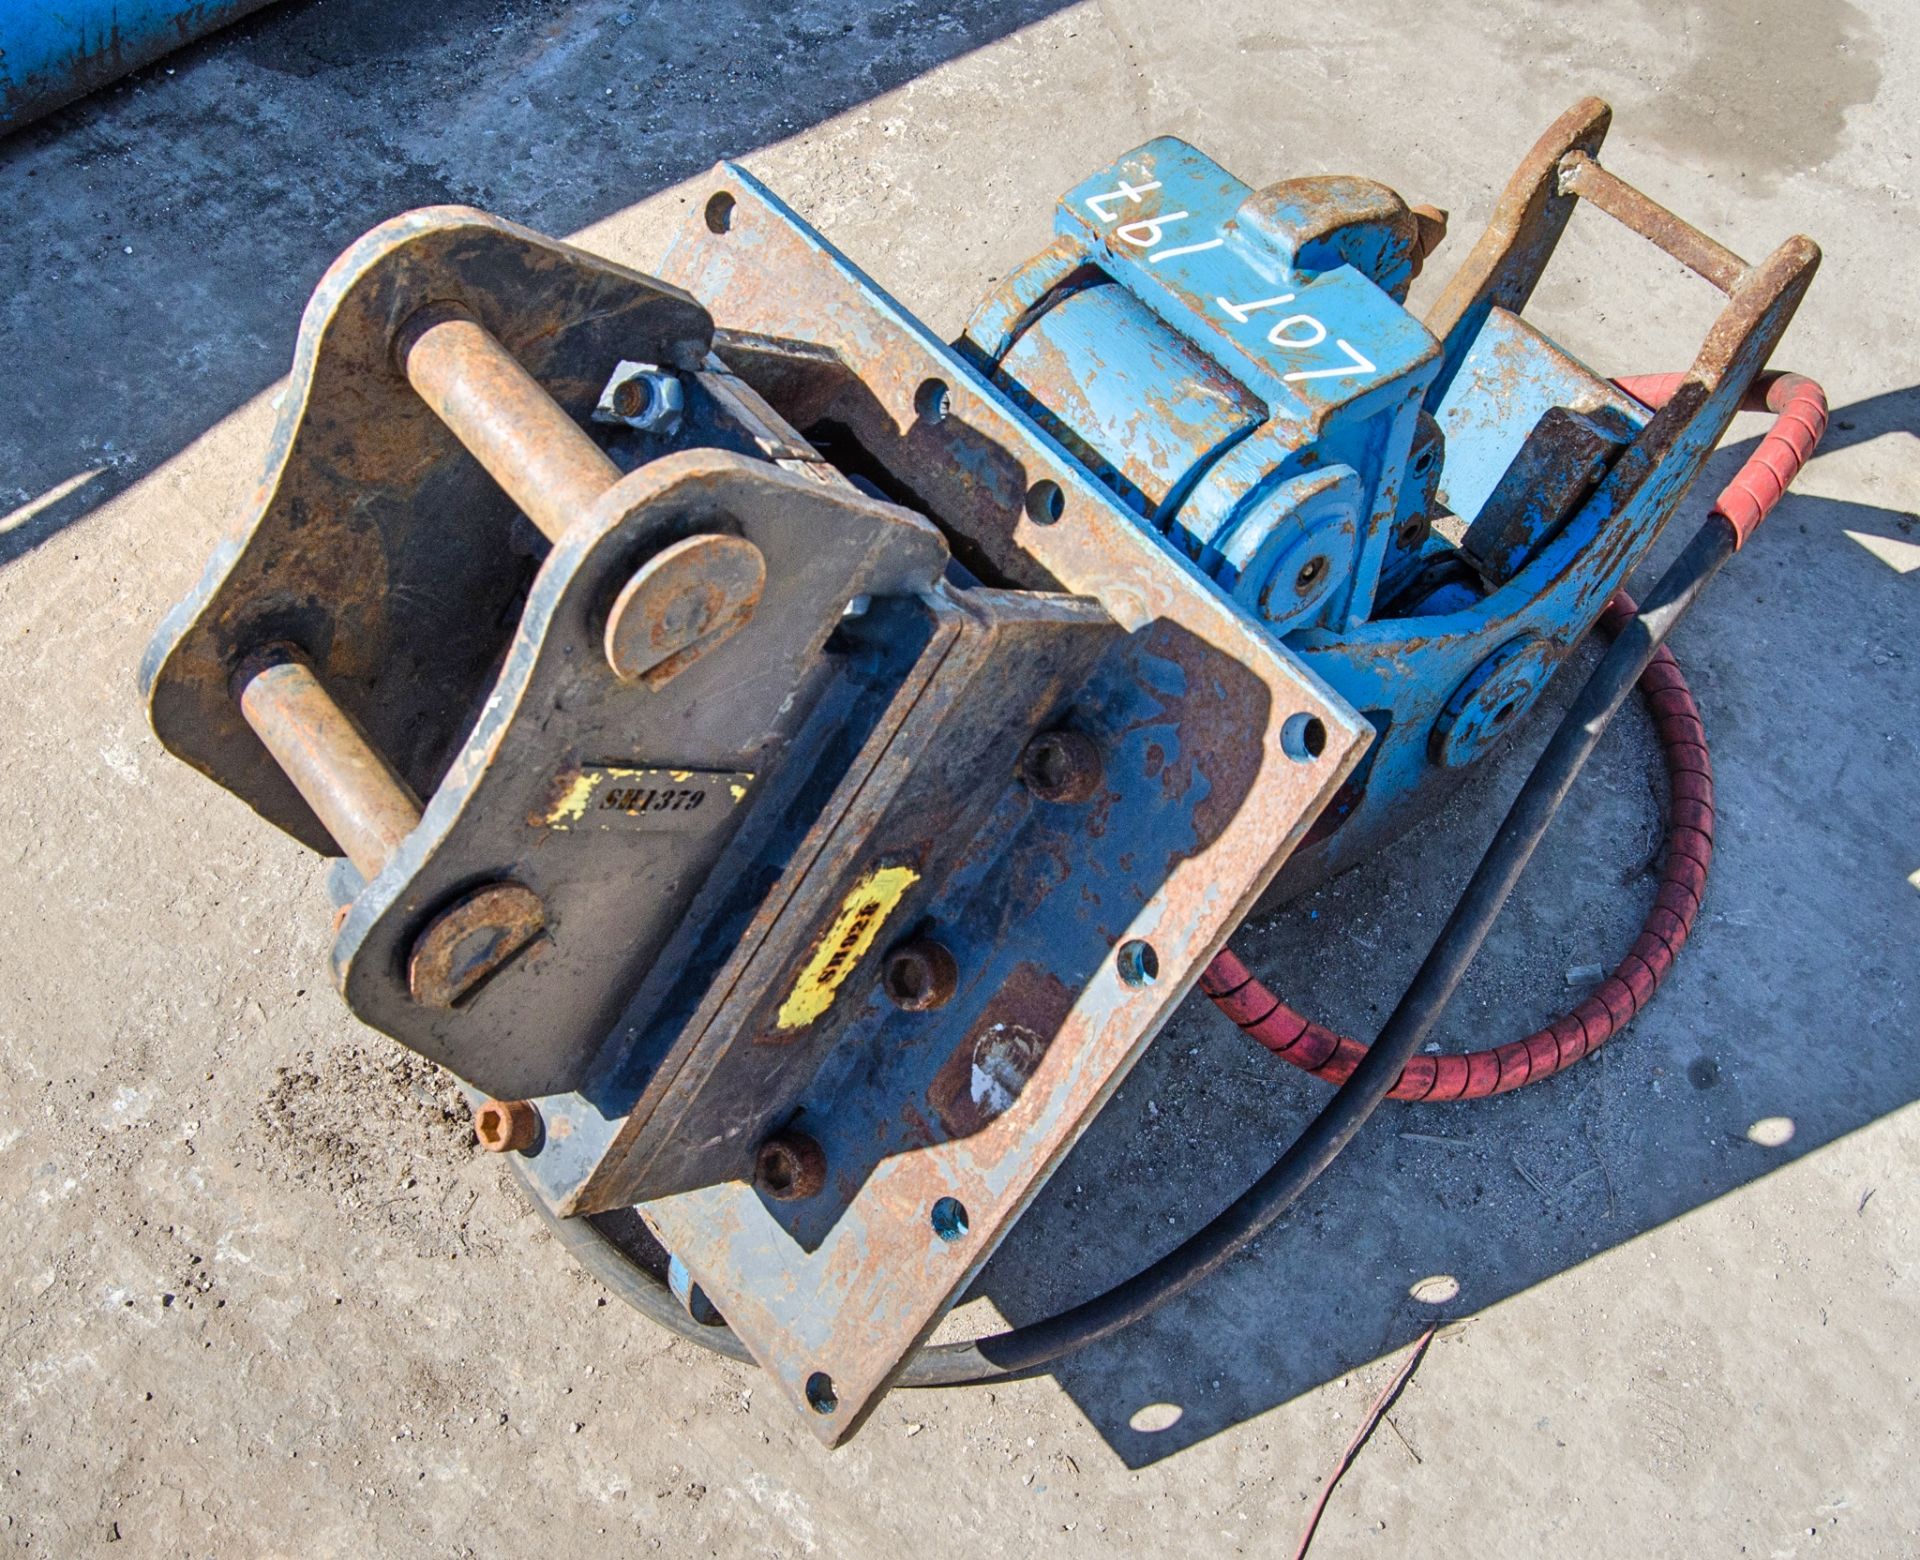 Hydraulic alligator crusher / fixed pulveriser to suit 1.5-3 tonne excavator c/w headstock Pin - Image 2 of 2